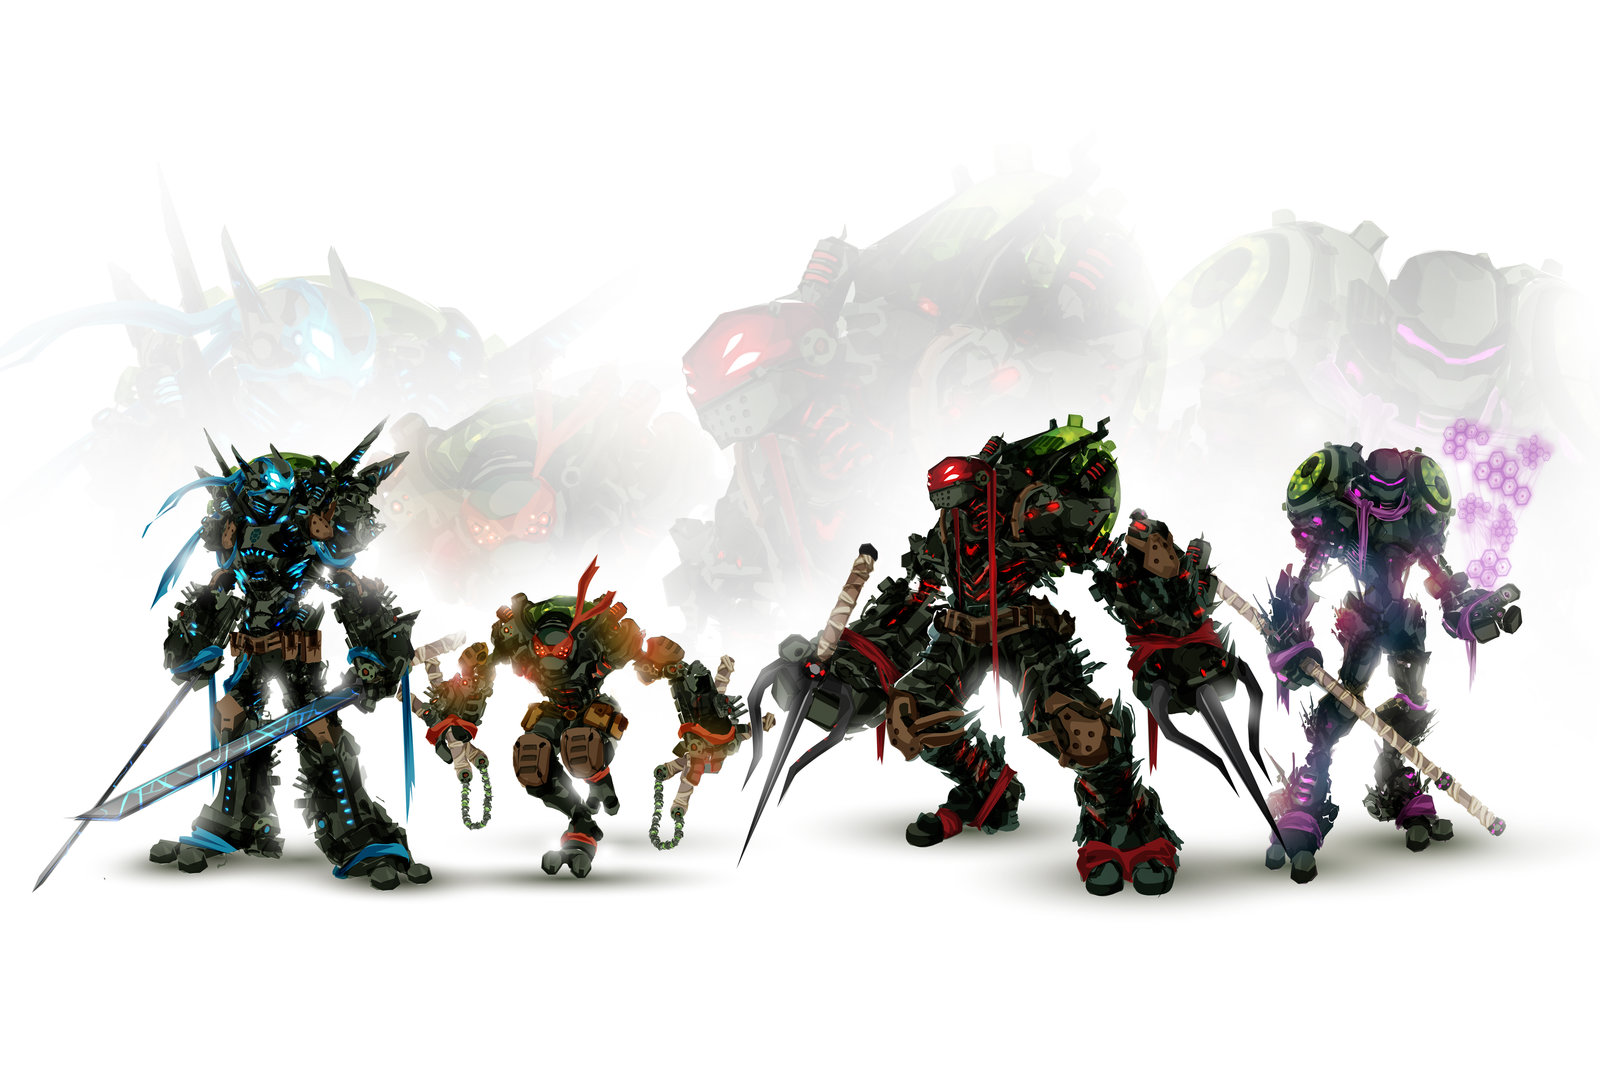 Link, Sephiroth And The Avengers, Turned Into Fearsome Robots